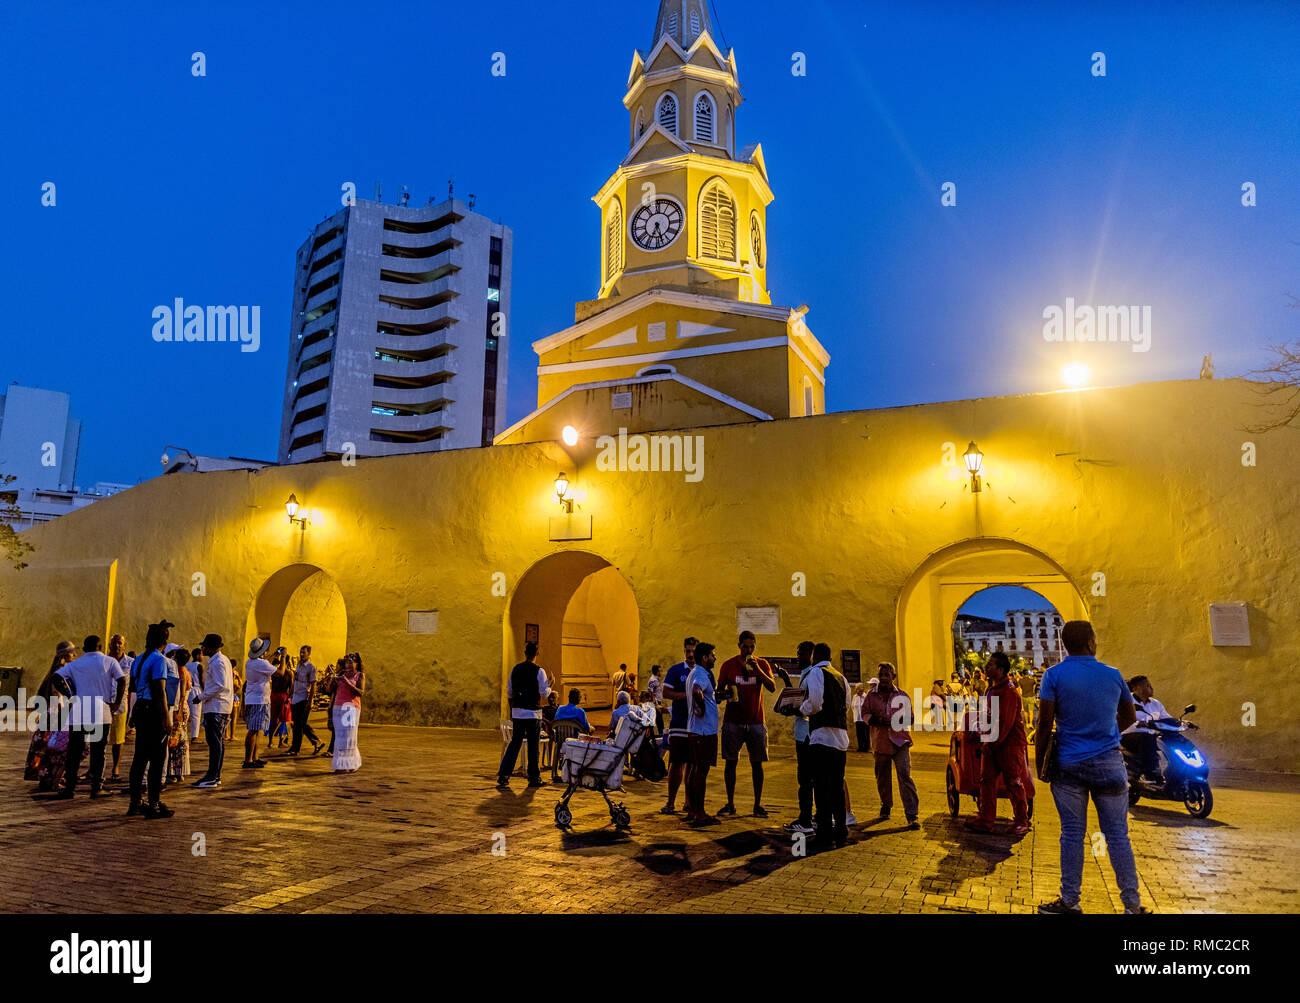 The Clock Tower At Night Catagena Colombia South America Stock Photo